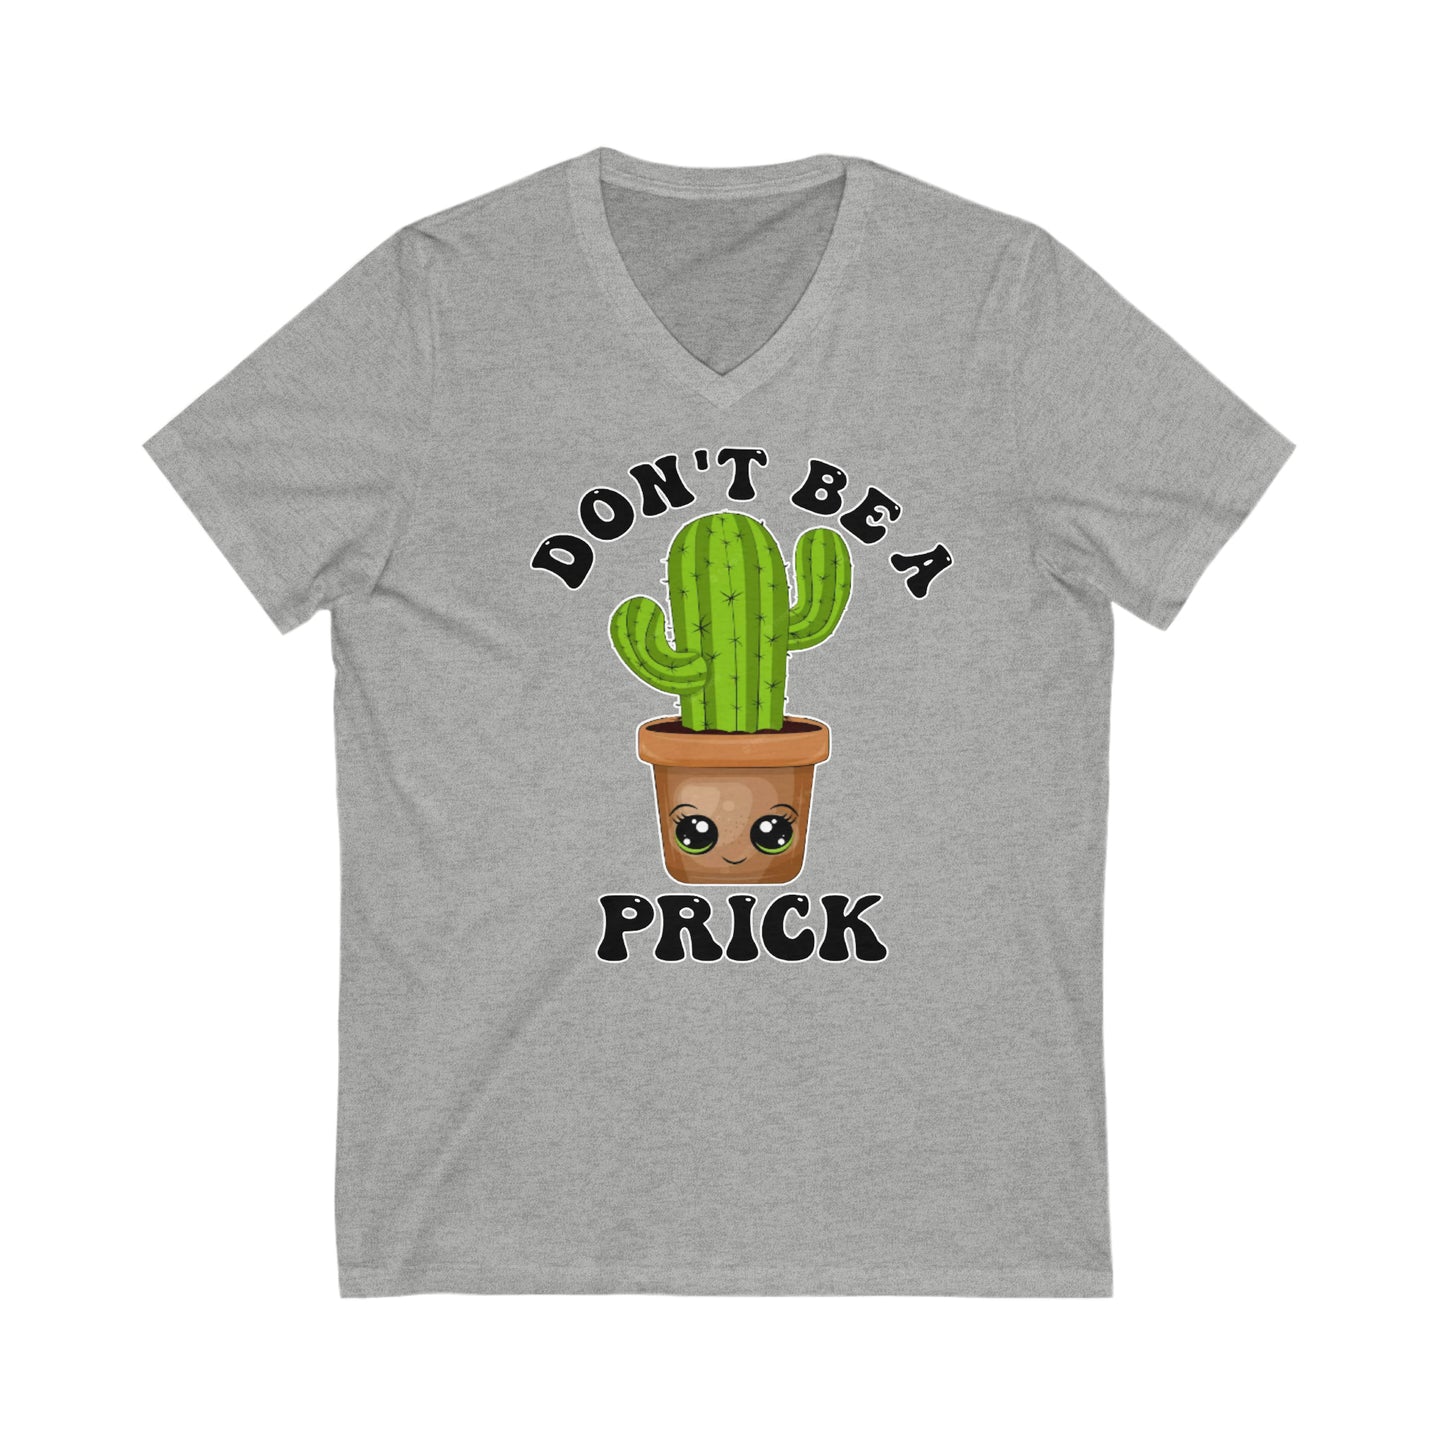 Don't Be A Prick: Unisex Jersey Short Sleeve V-Neck Tee